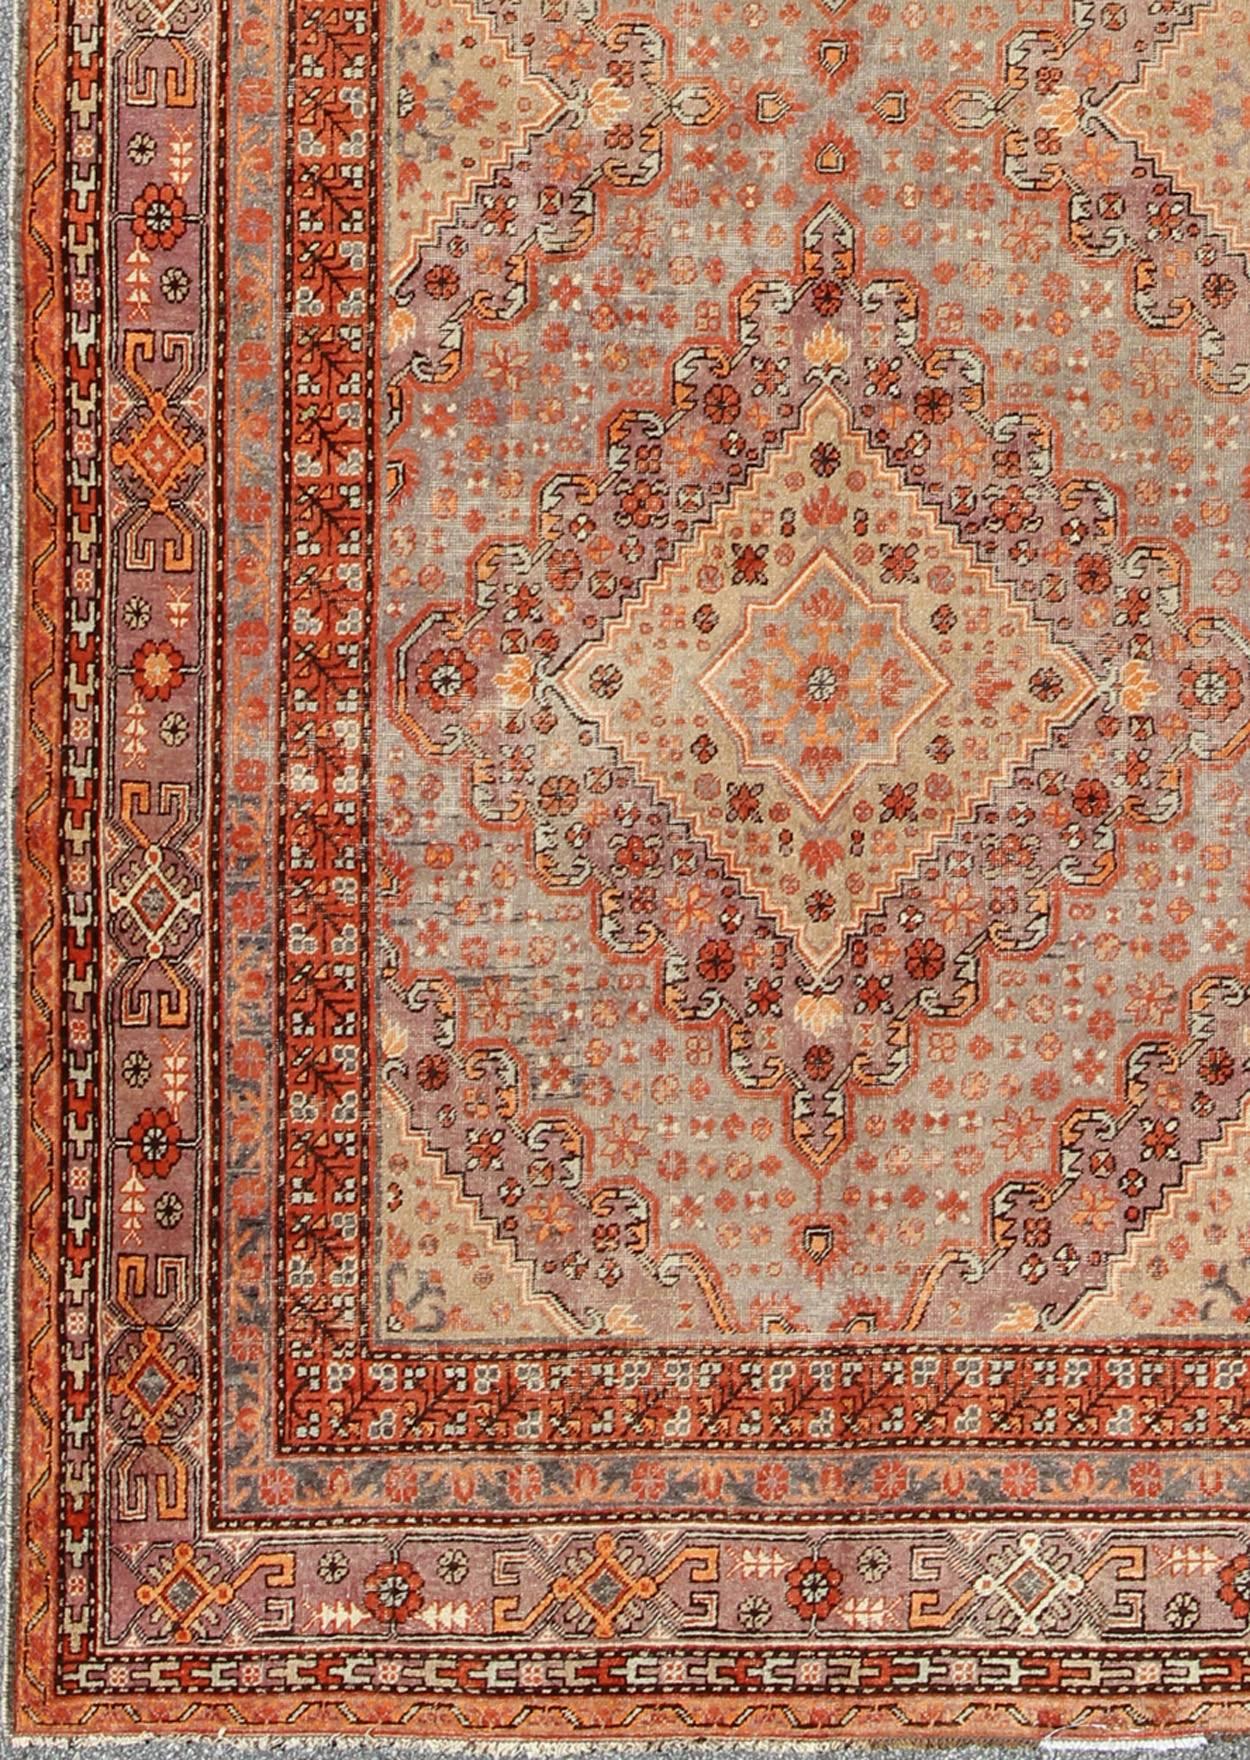 Antique Khotan/Samarkand Rug in Gray, Lavender, Rust  and Light Green
This delicately rendered antique Khotan rug was handcrafted in Turkestan during the early part of 20th century and displays an intricate Sub-geometric design with paired,